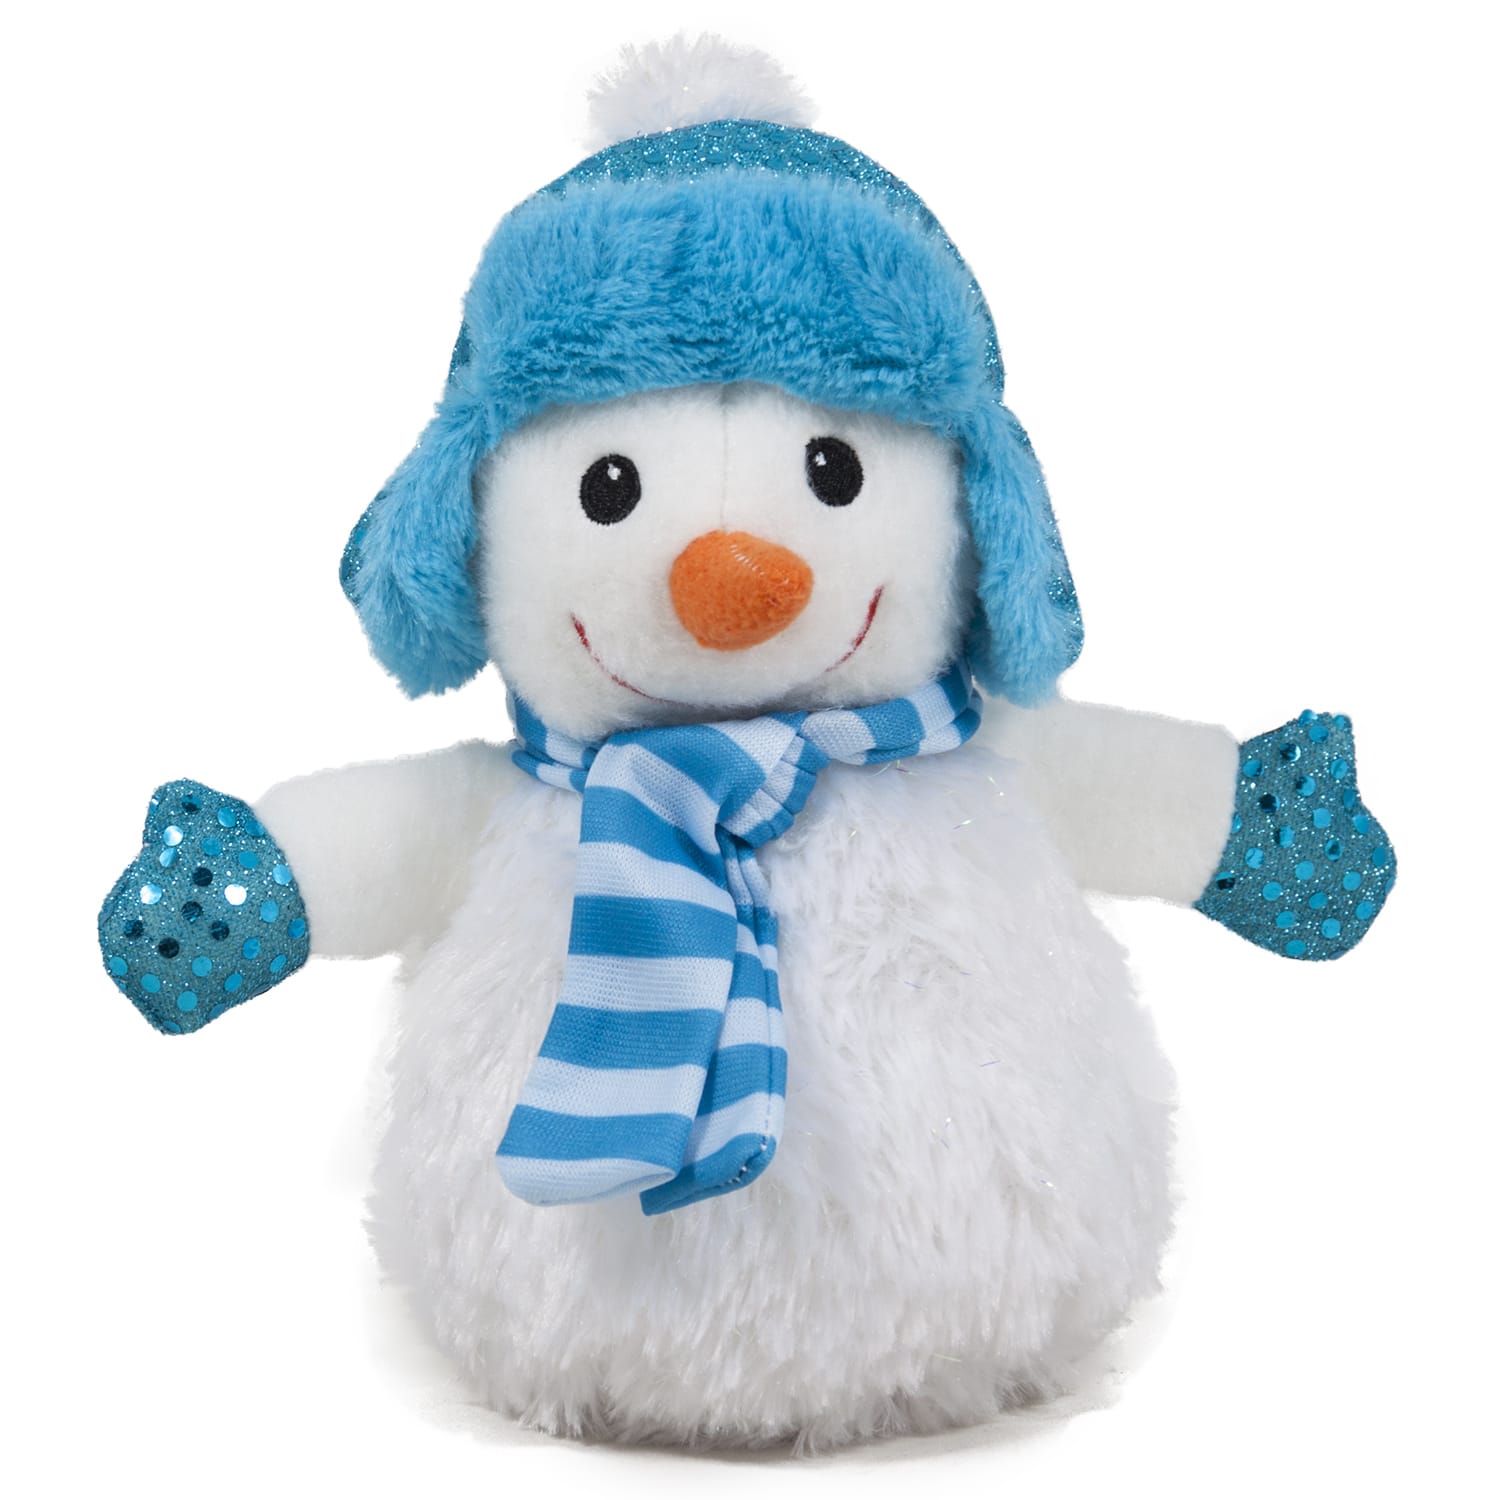 Snowman with hat and scarf - Blue